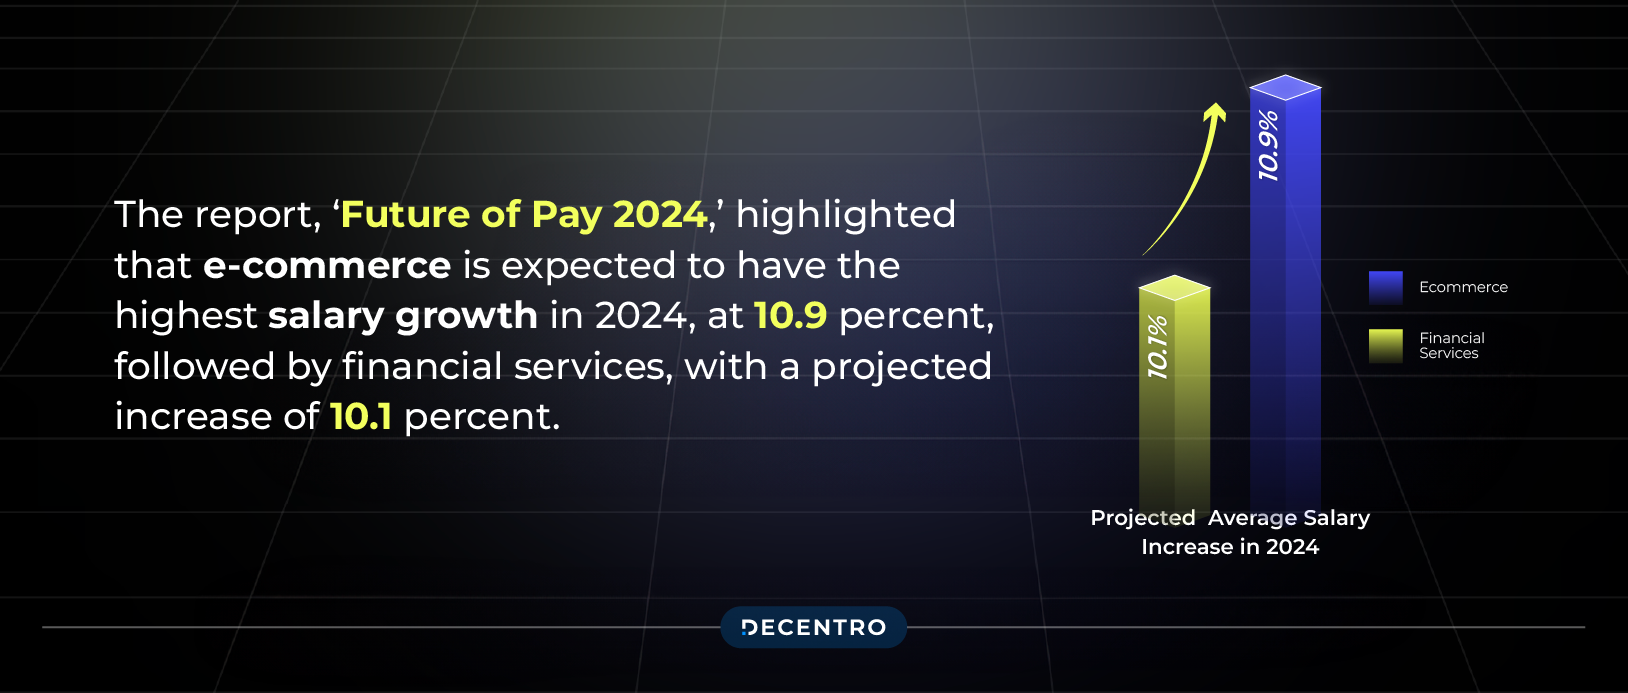 Future of Pay 2024 report takeaways 